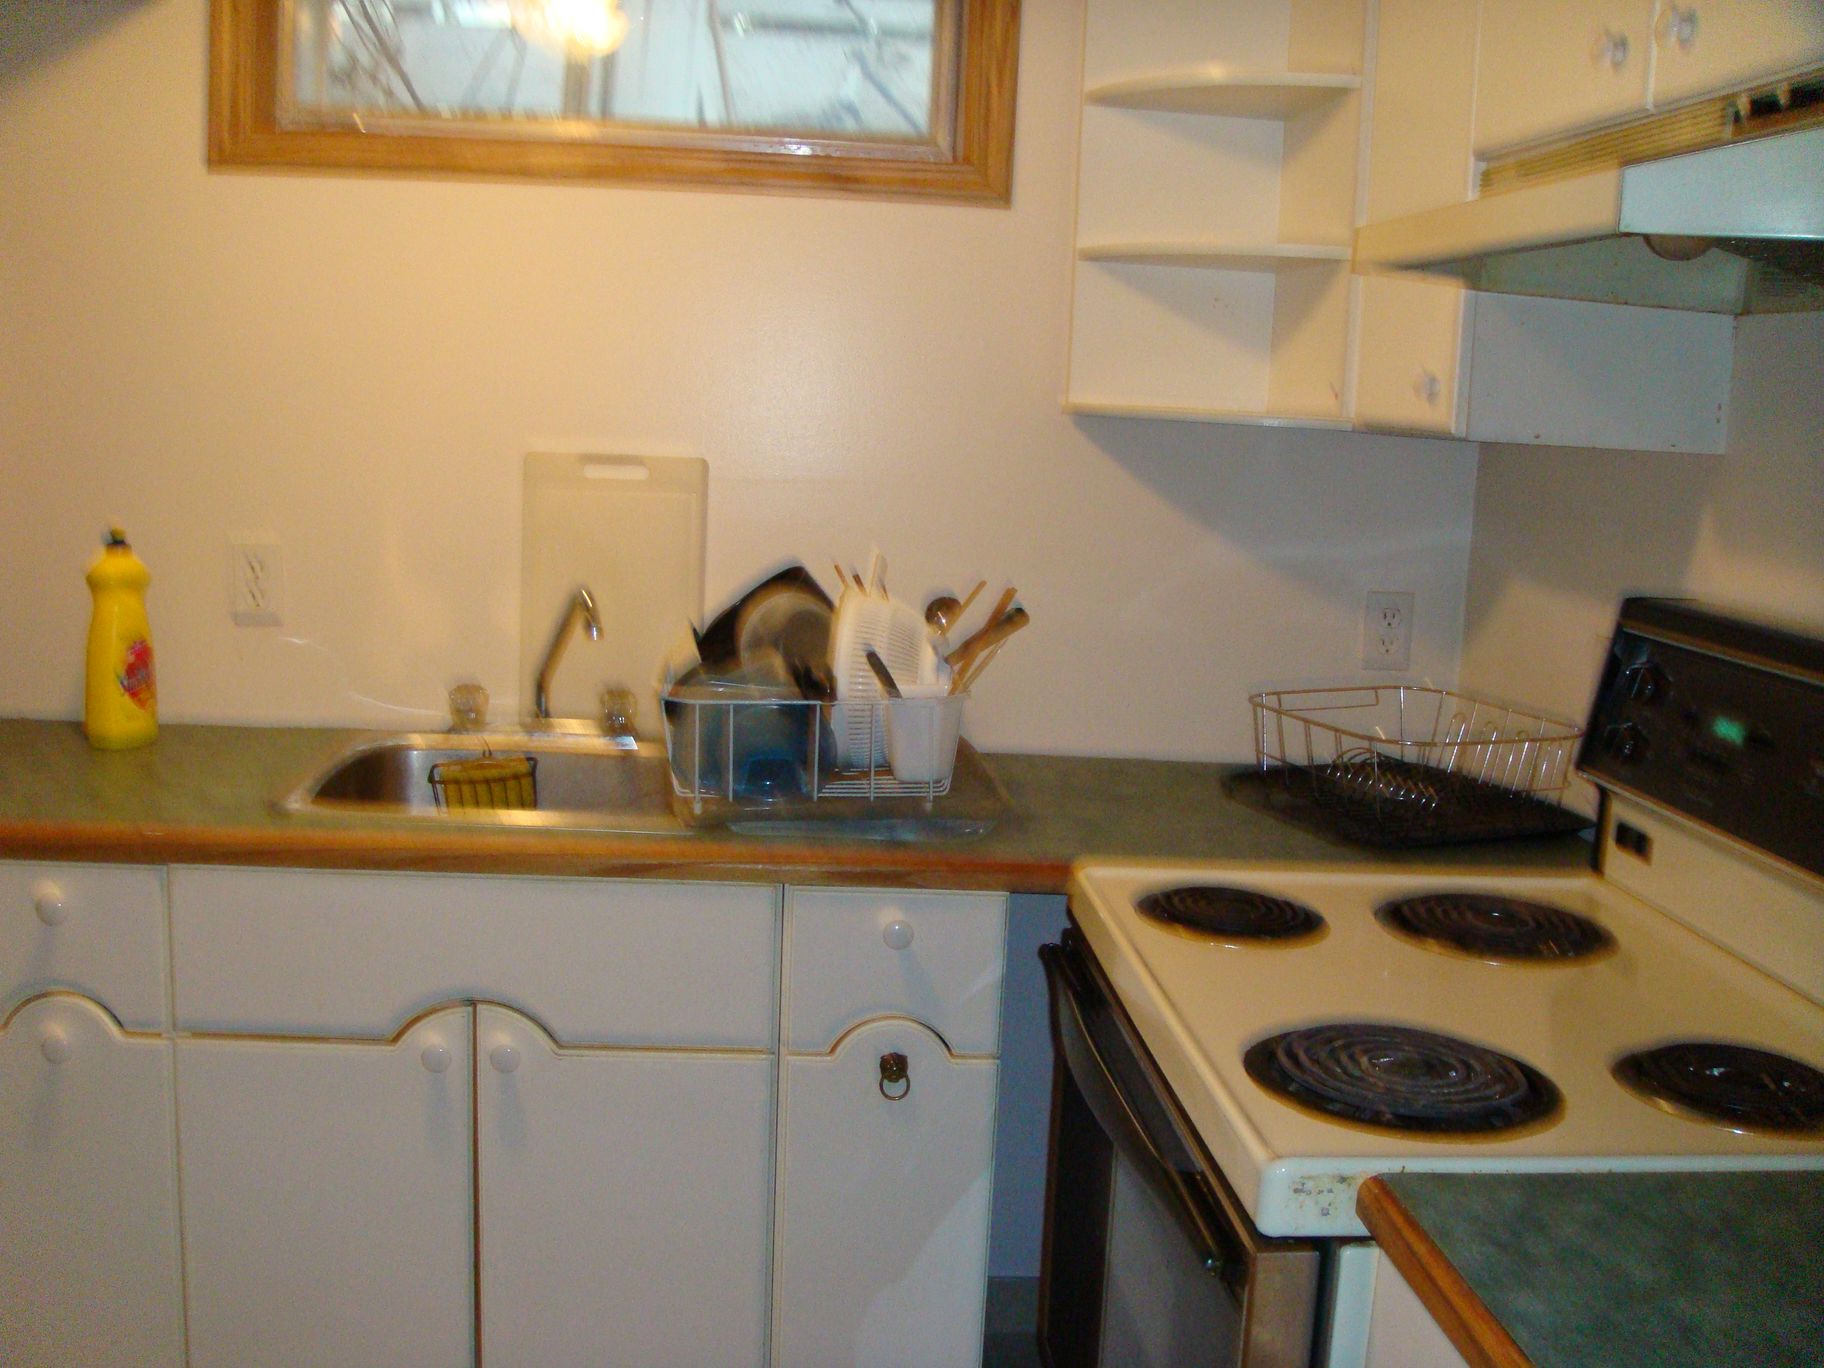 NEWLY RENOVATED 1 BDRM PLUS DEN LOWER SUITE BY UNIVERSITY!